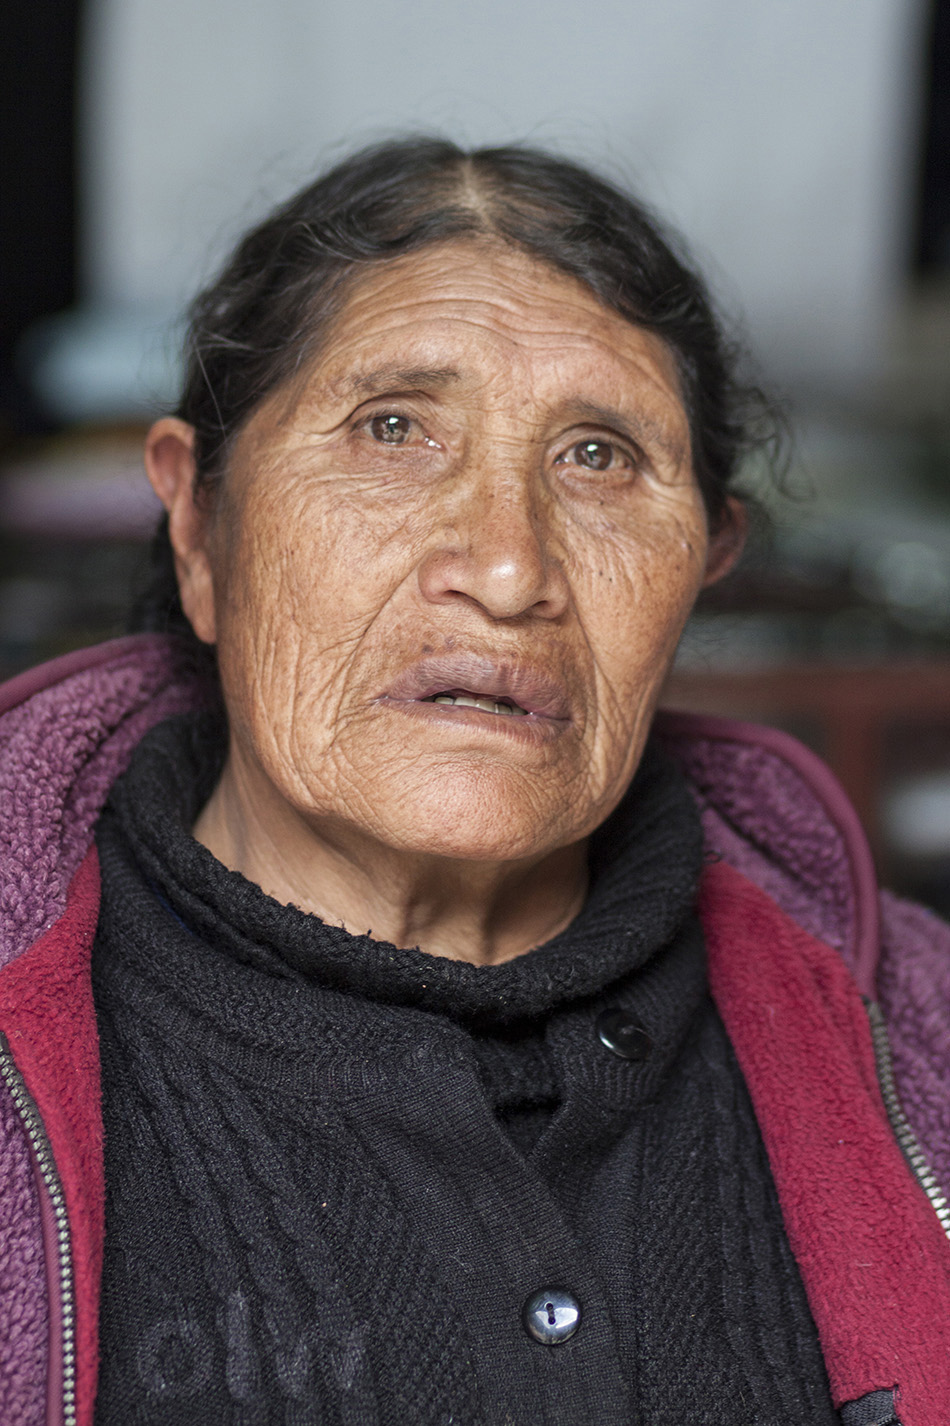 perou  peruvian peruvians old wrinkle Wrinkles face faces Wise beauty Expression expressions